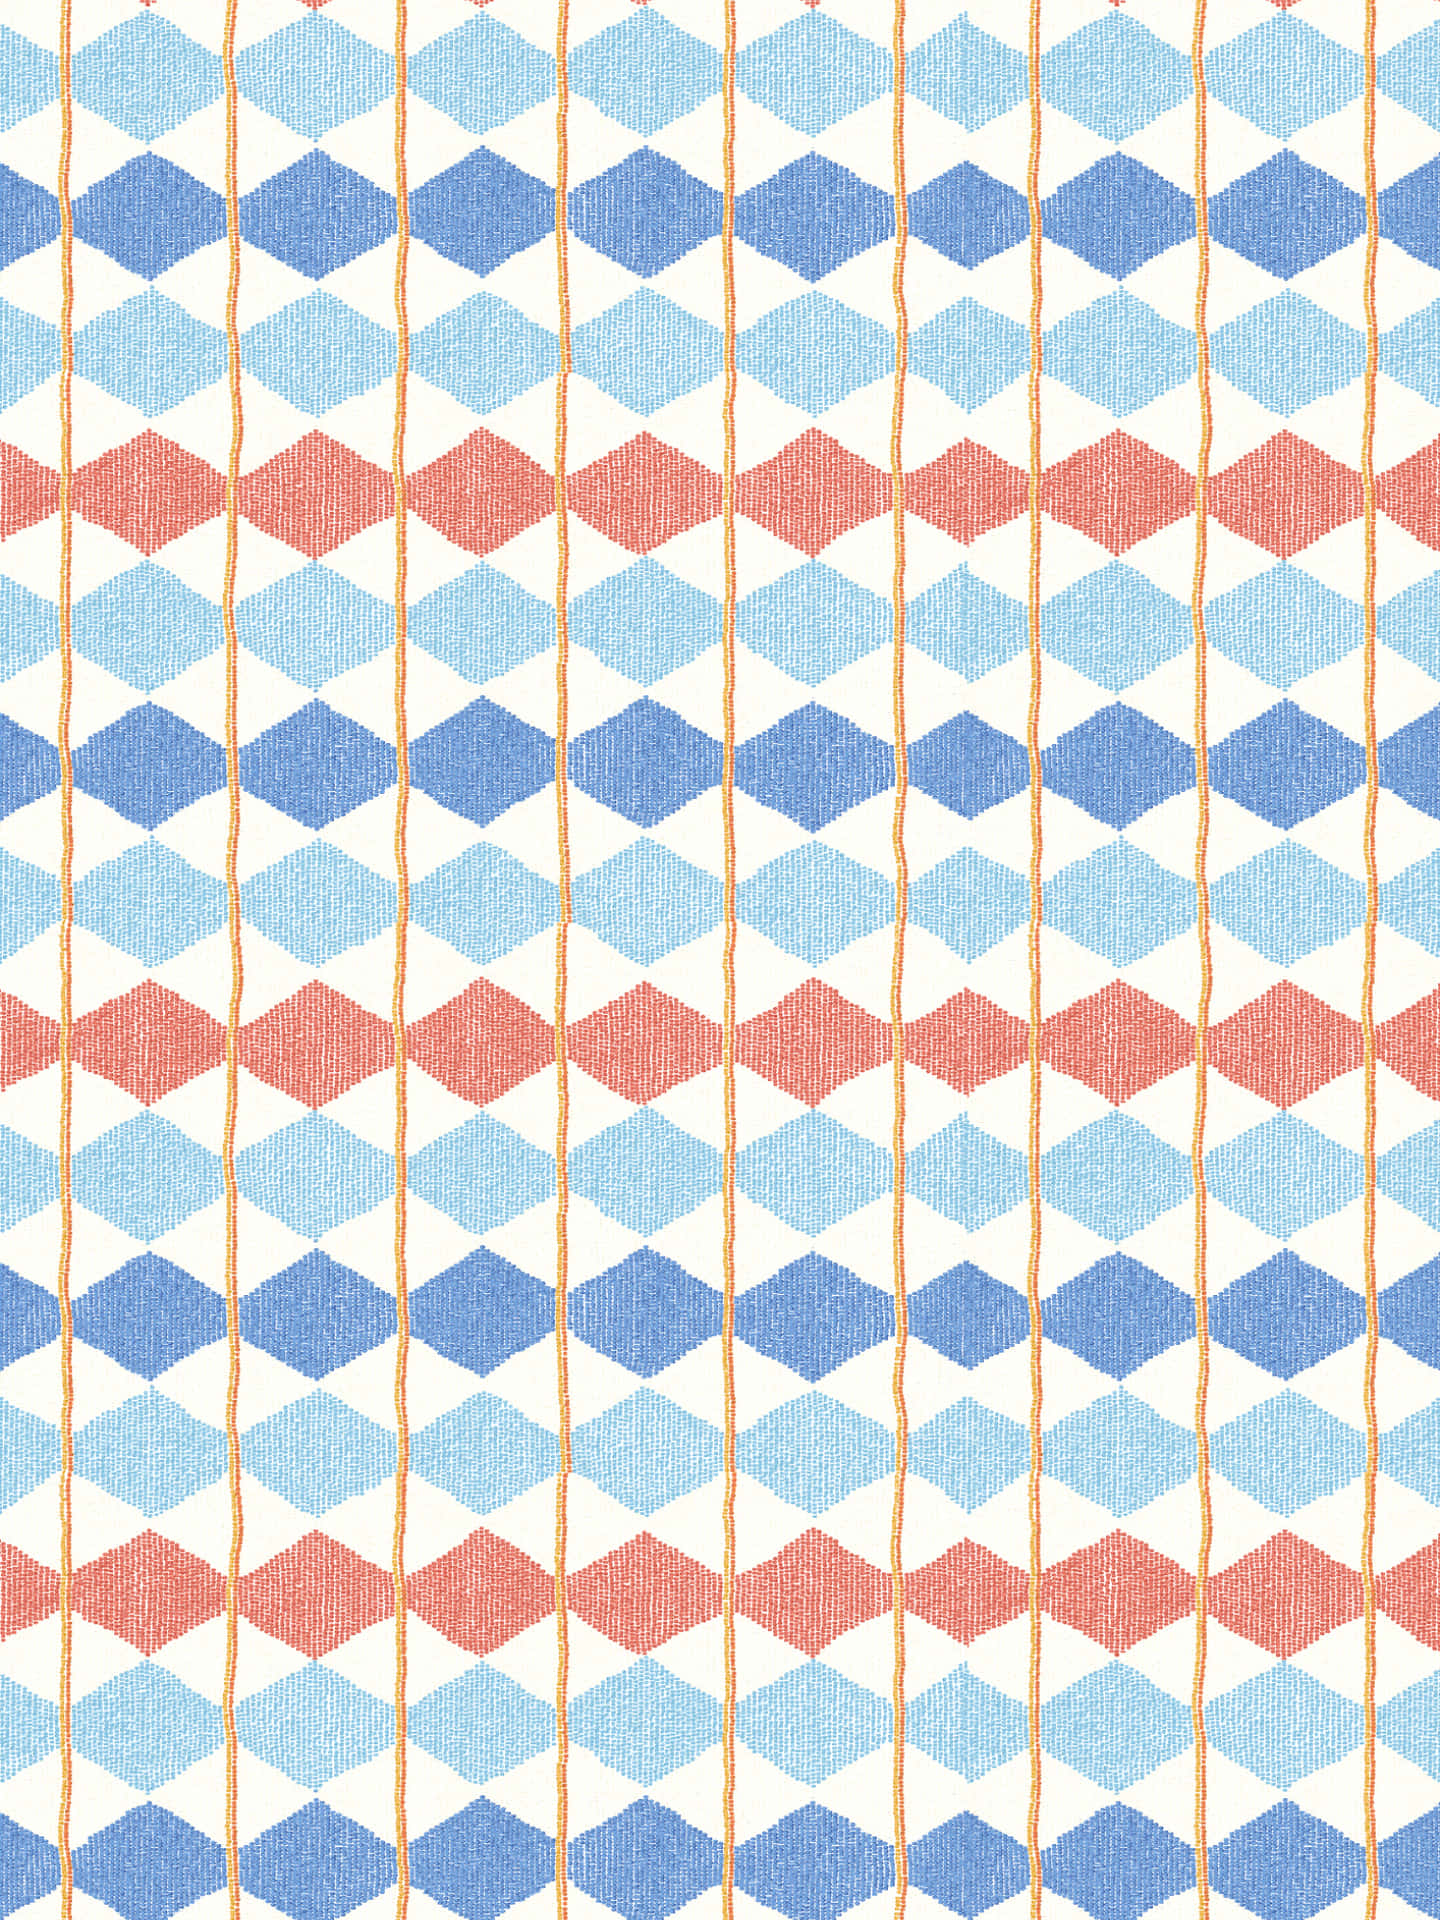 Obtuse Triangles Of 4 Different Colors Wallpaper